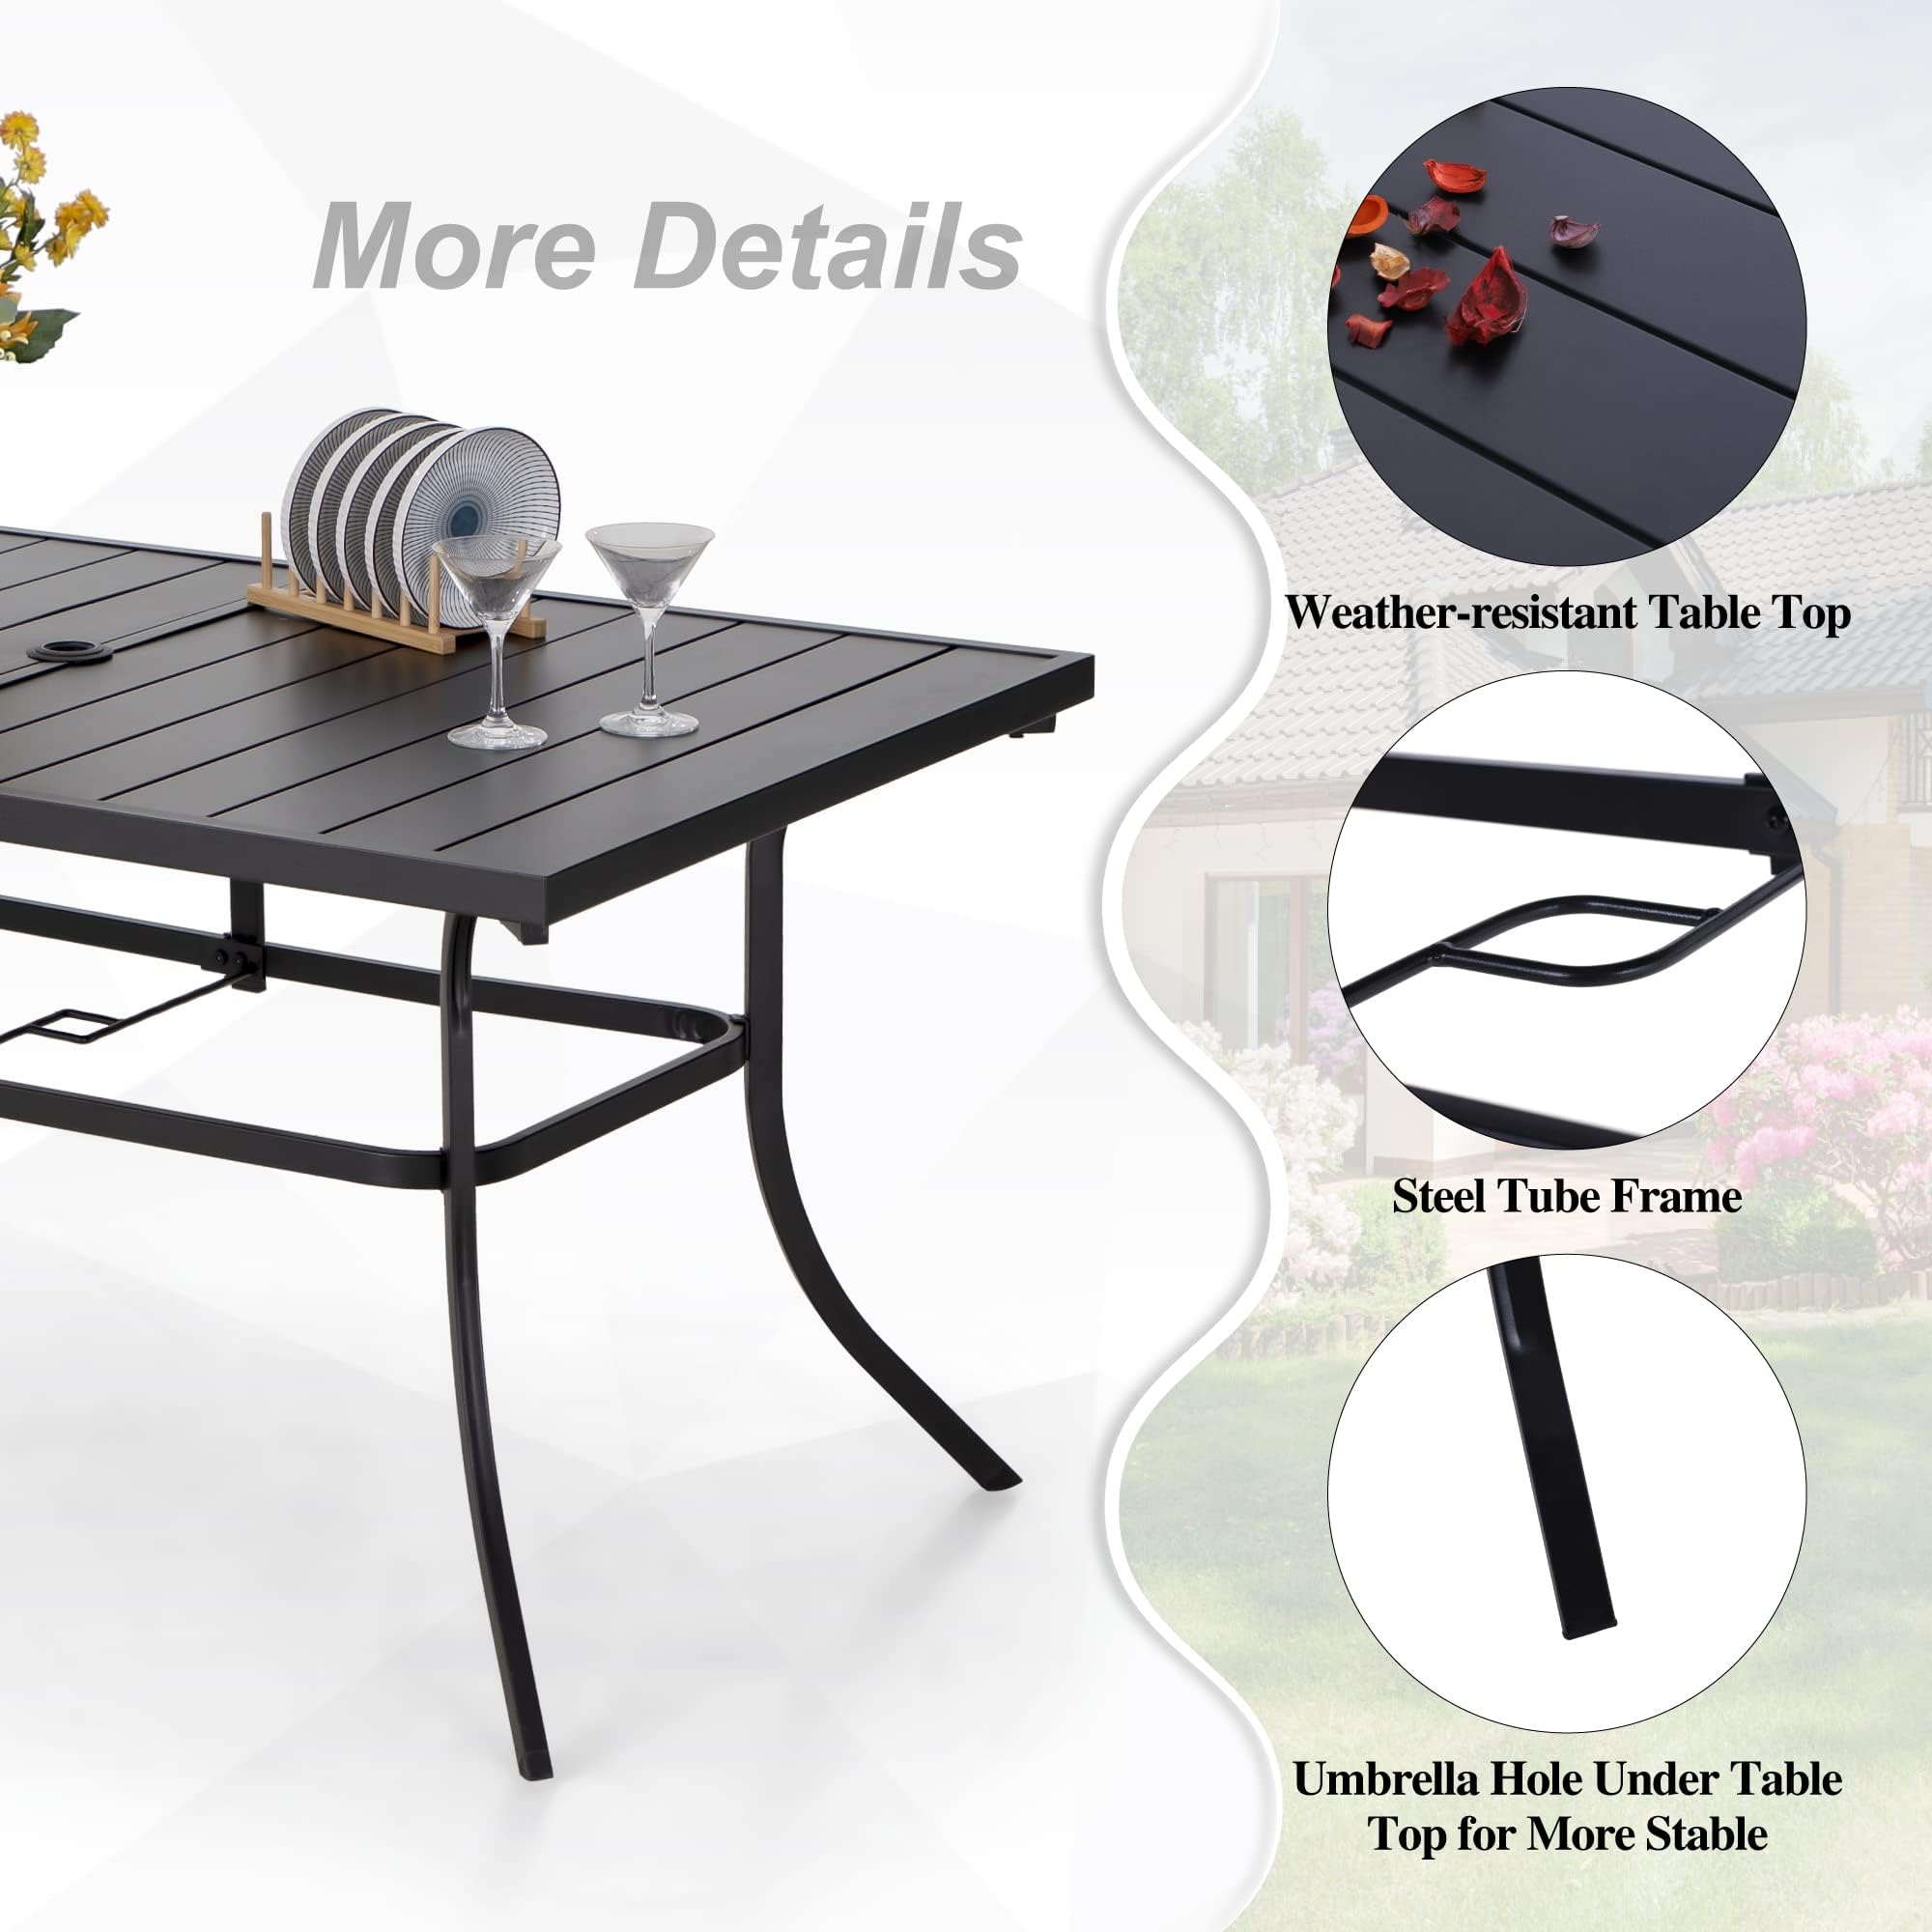 PHI VILLA 6-Person Outdoor Metal Steel Slat Dining Rectangle Table with Adjustable Umbrella Hole, Weather-Resistant for Patio Outdoor Use, Black